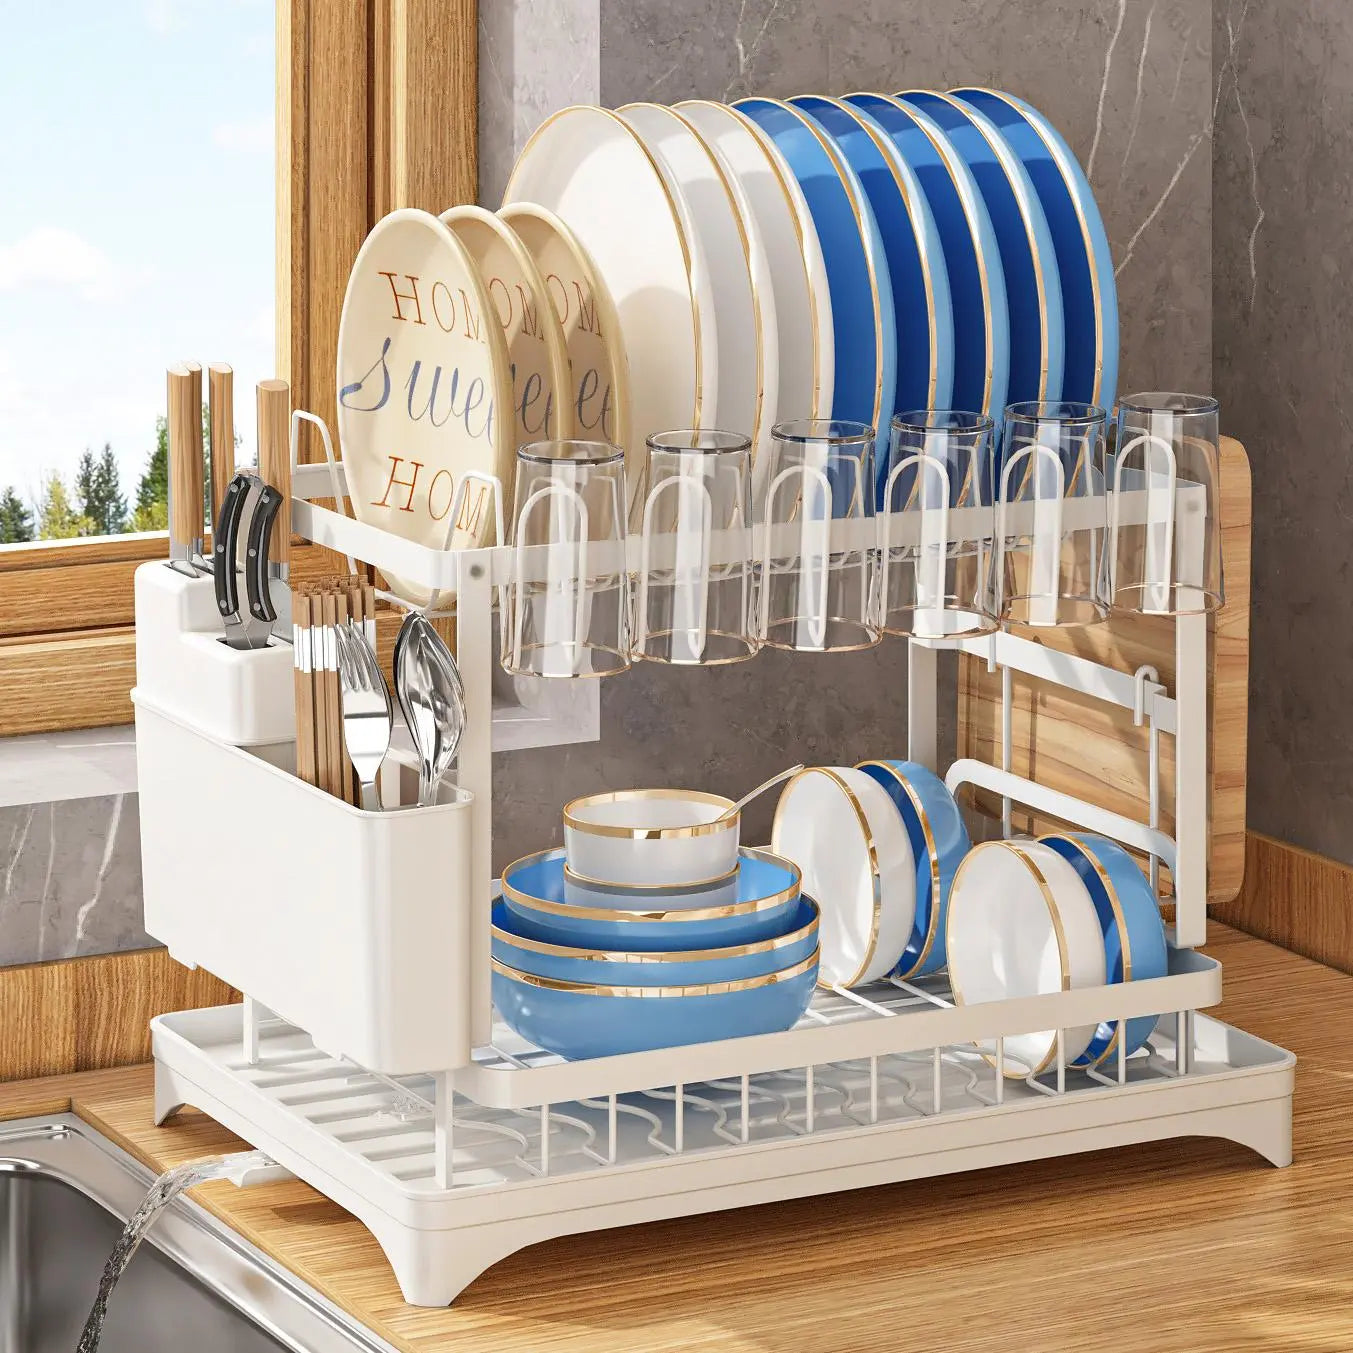 2-Tier Dish Drying Rack, 1 Piece Dish Drying Organiser with Drainboard, Modern Trendy Detachable Dish Drainer Organizer, Tableware Drain Storage Shelves, Kitchen Cutlery Organizer, Kitchen Accessories, Home Accessories, Mother'S Day Gift